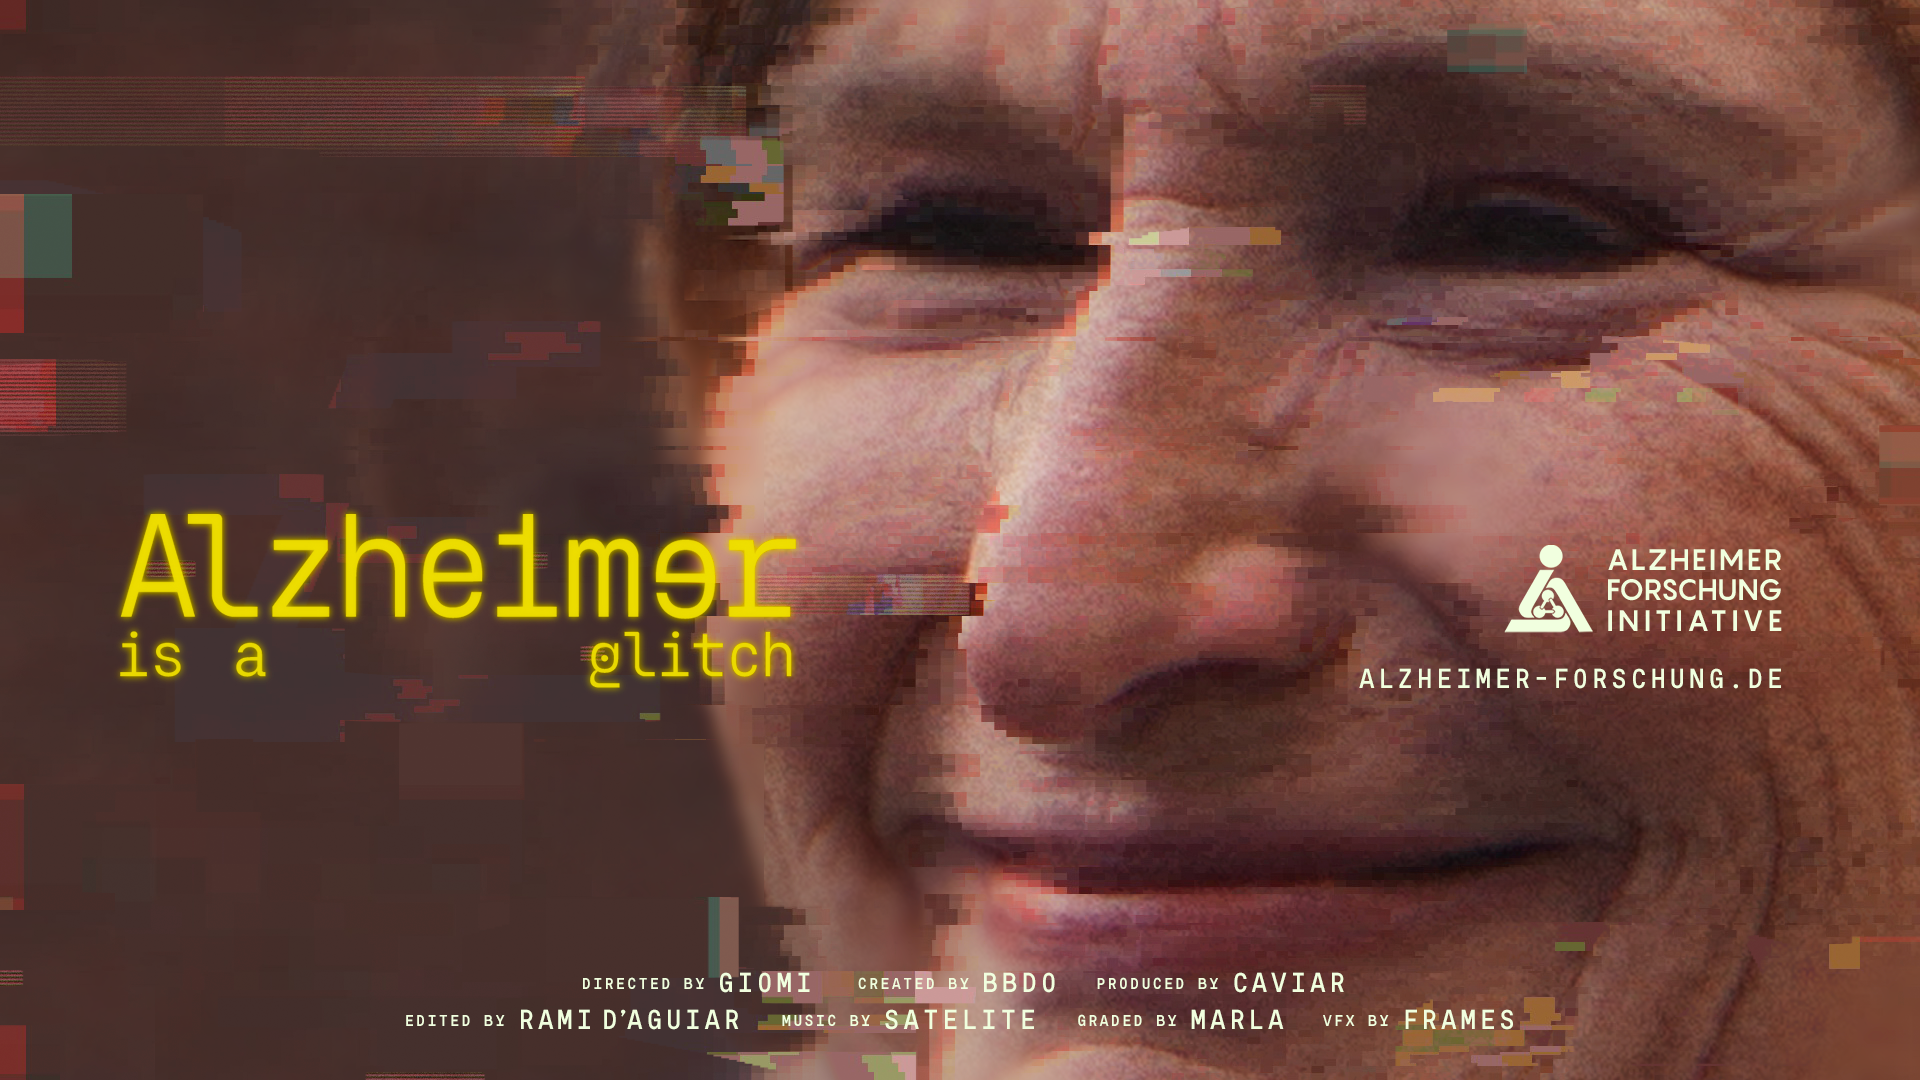 Alzheimer Research Foundation ↳ A film based on true events about glitched memories of a patient.